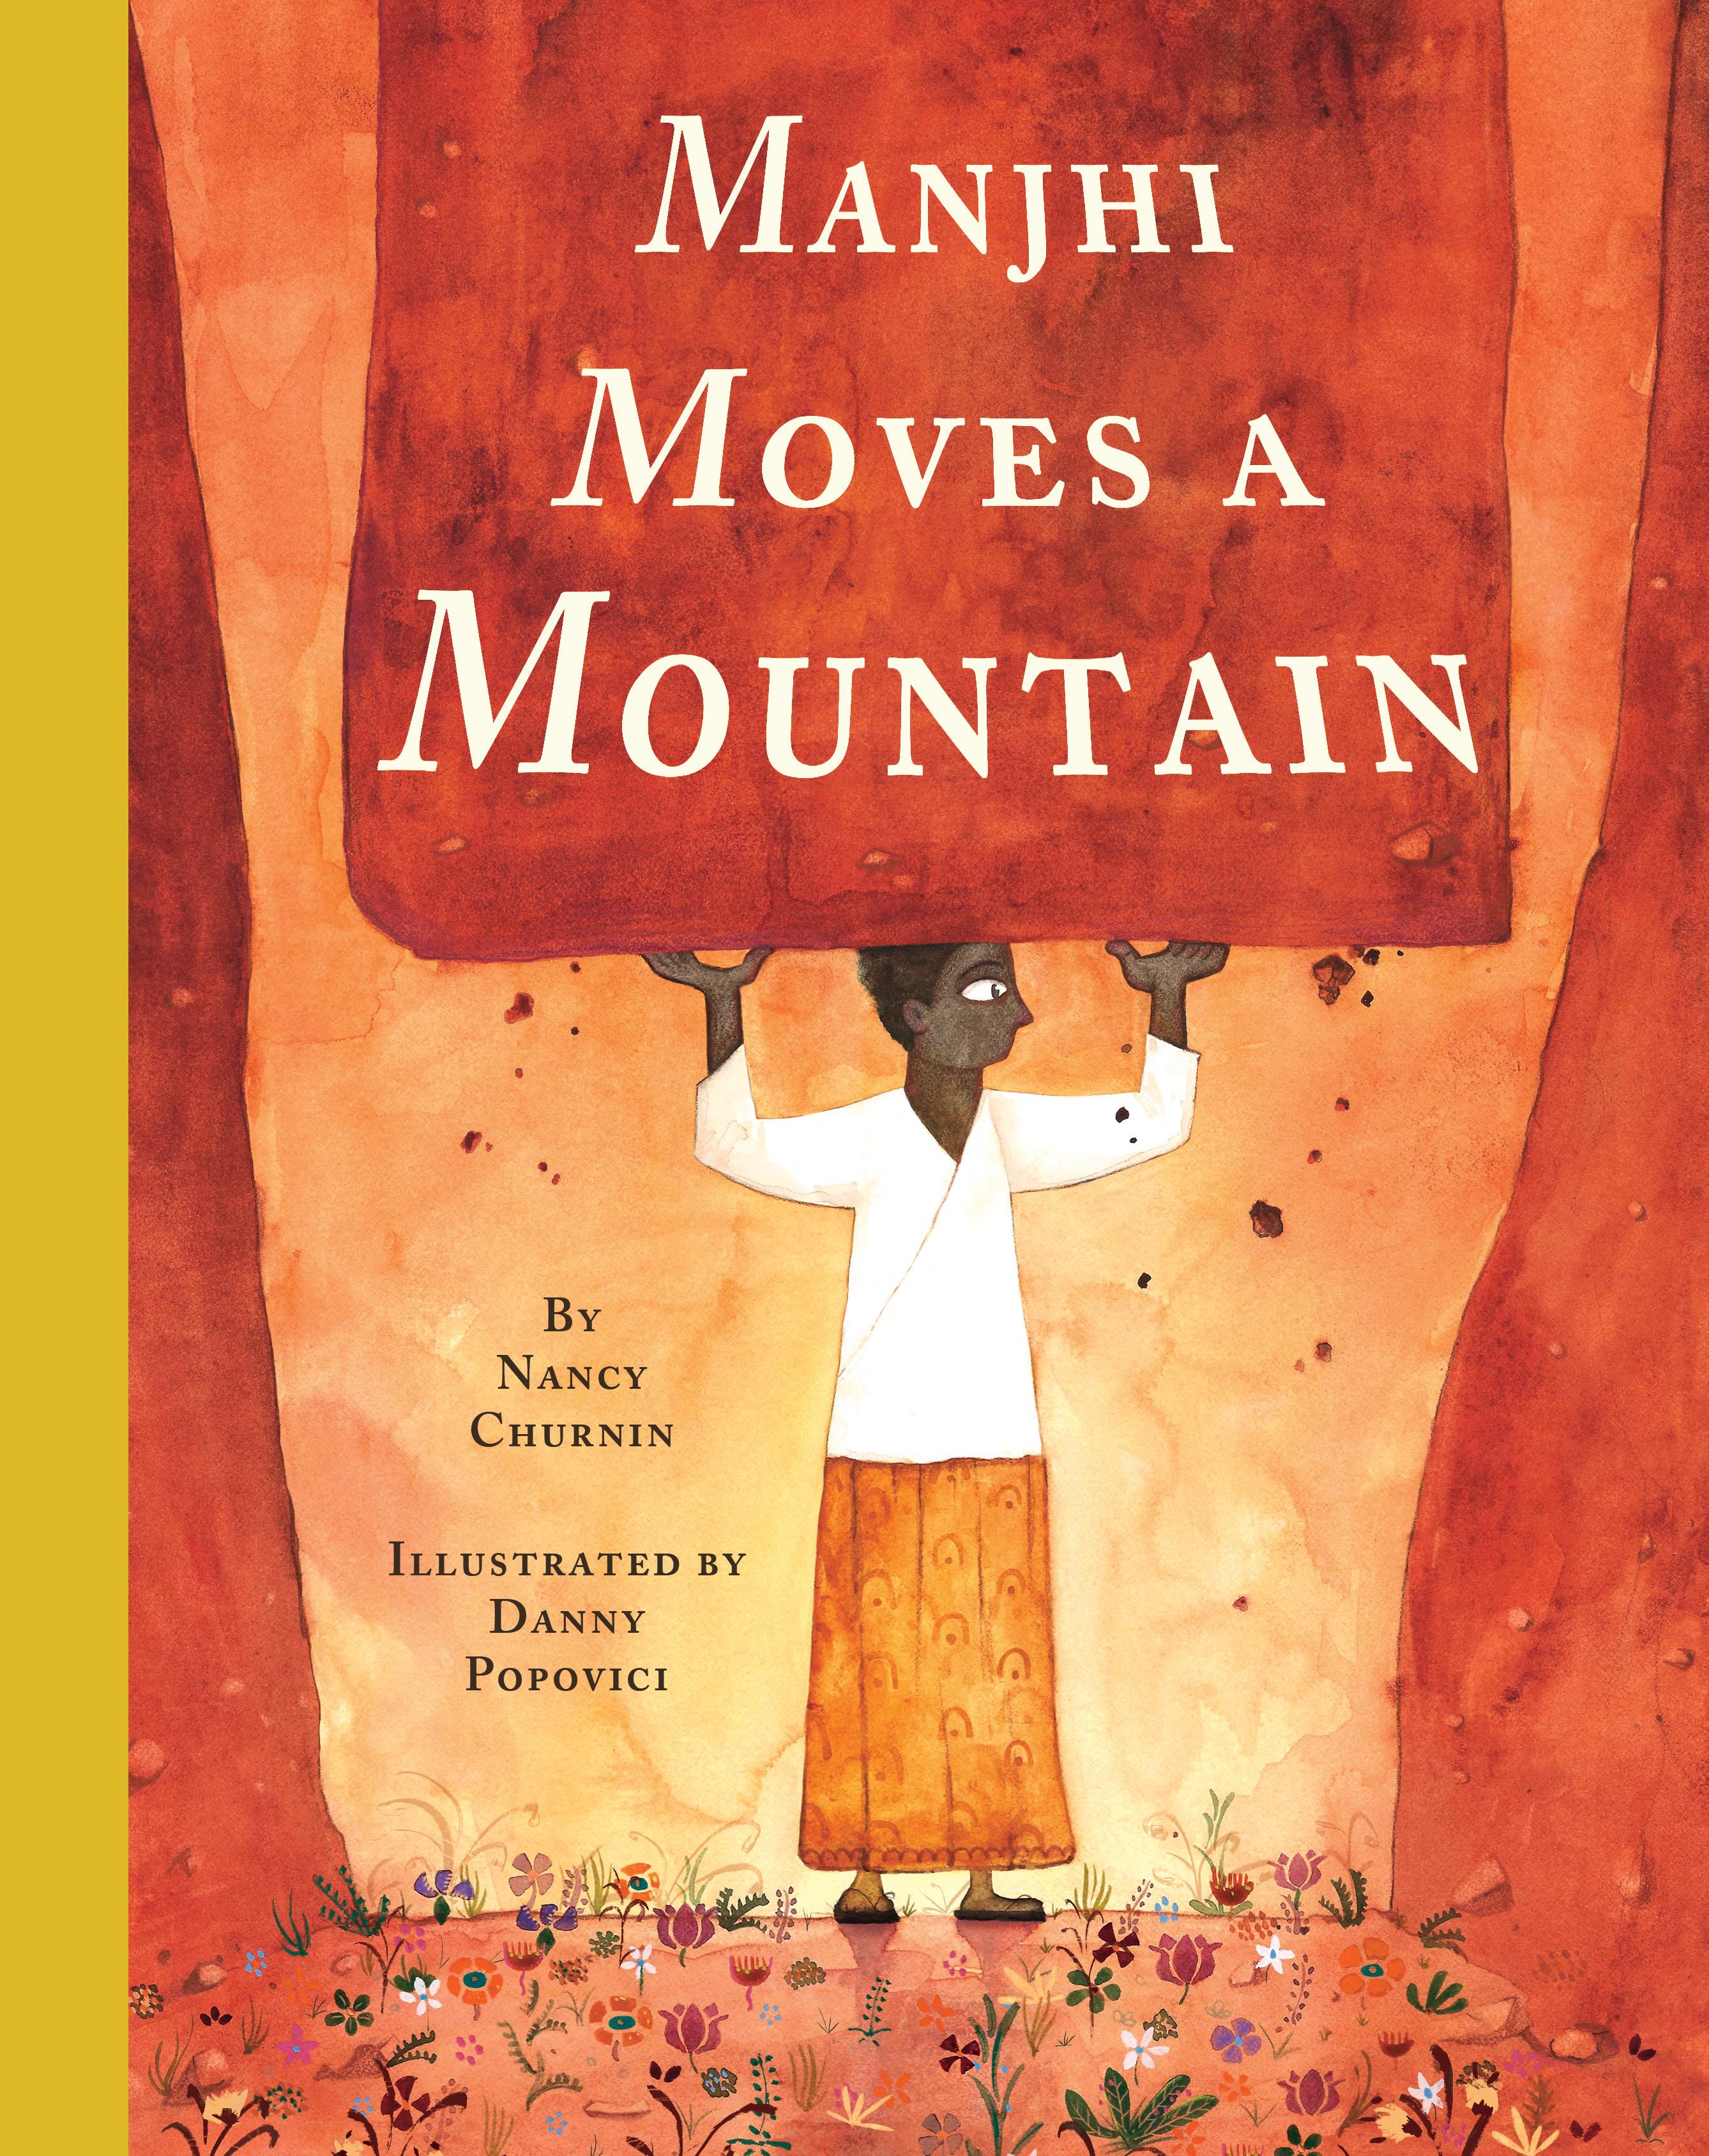 The Man Who Moved a Mountain: An Inspiring Story Like None Other